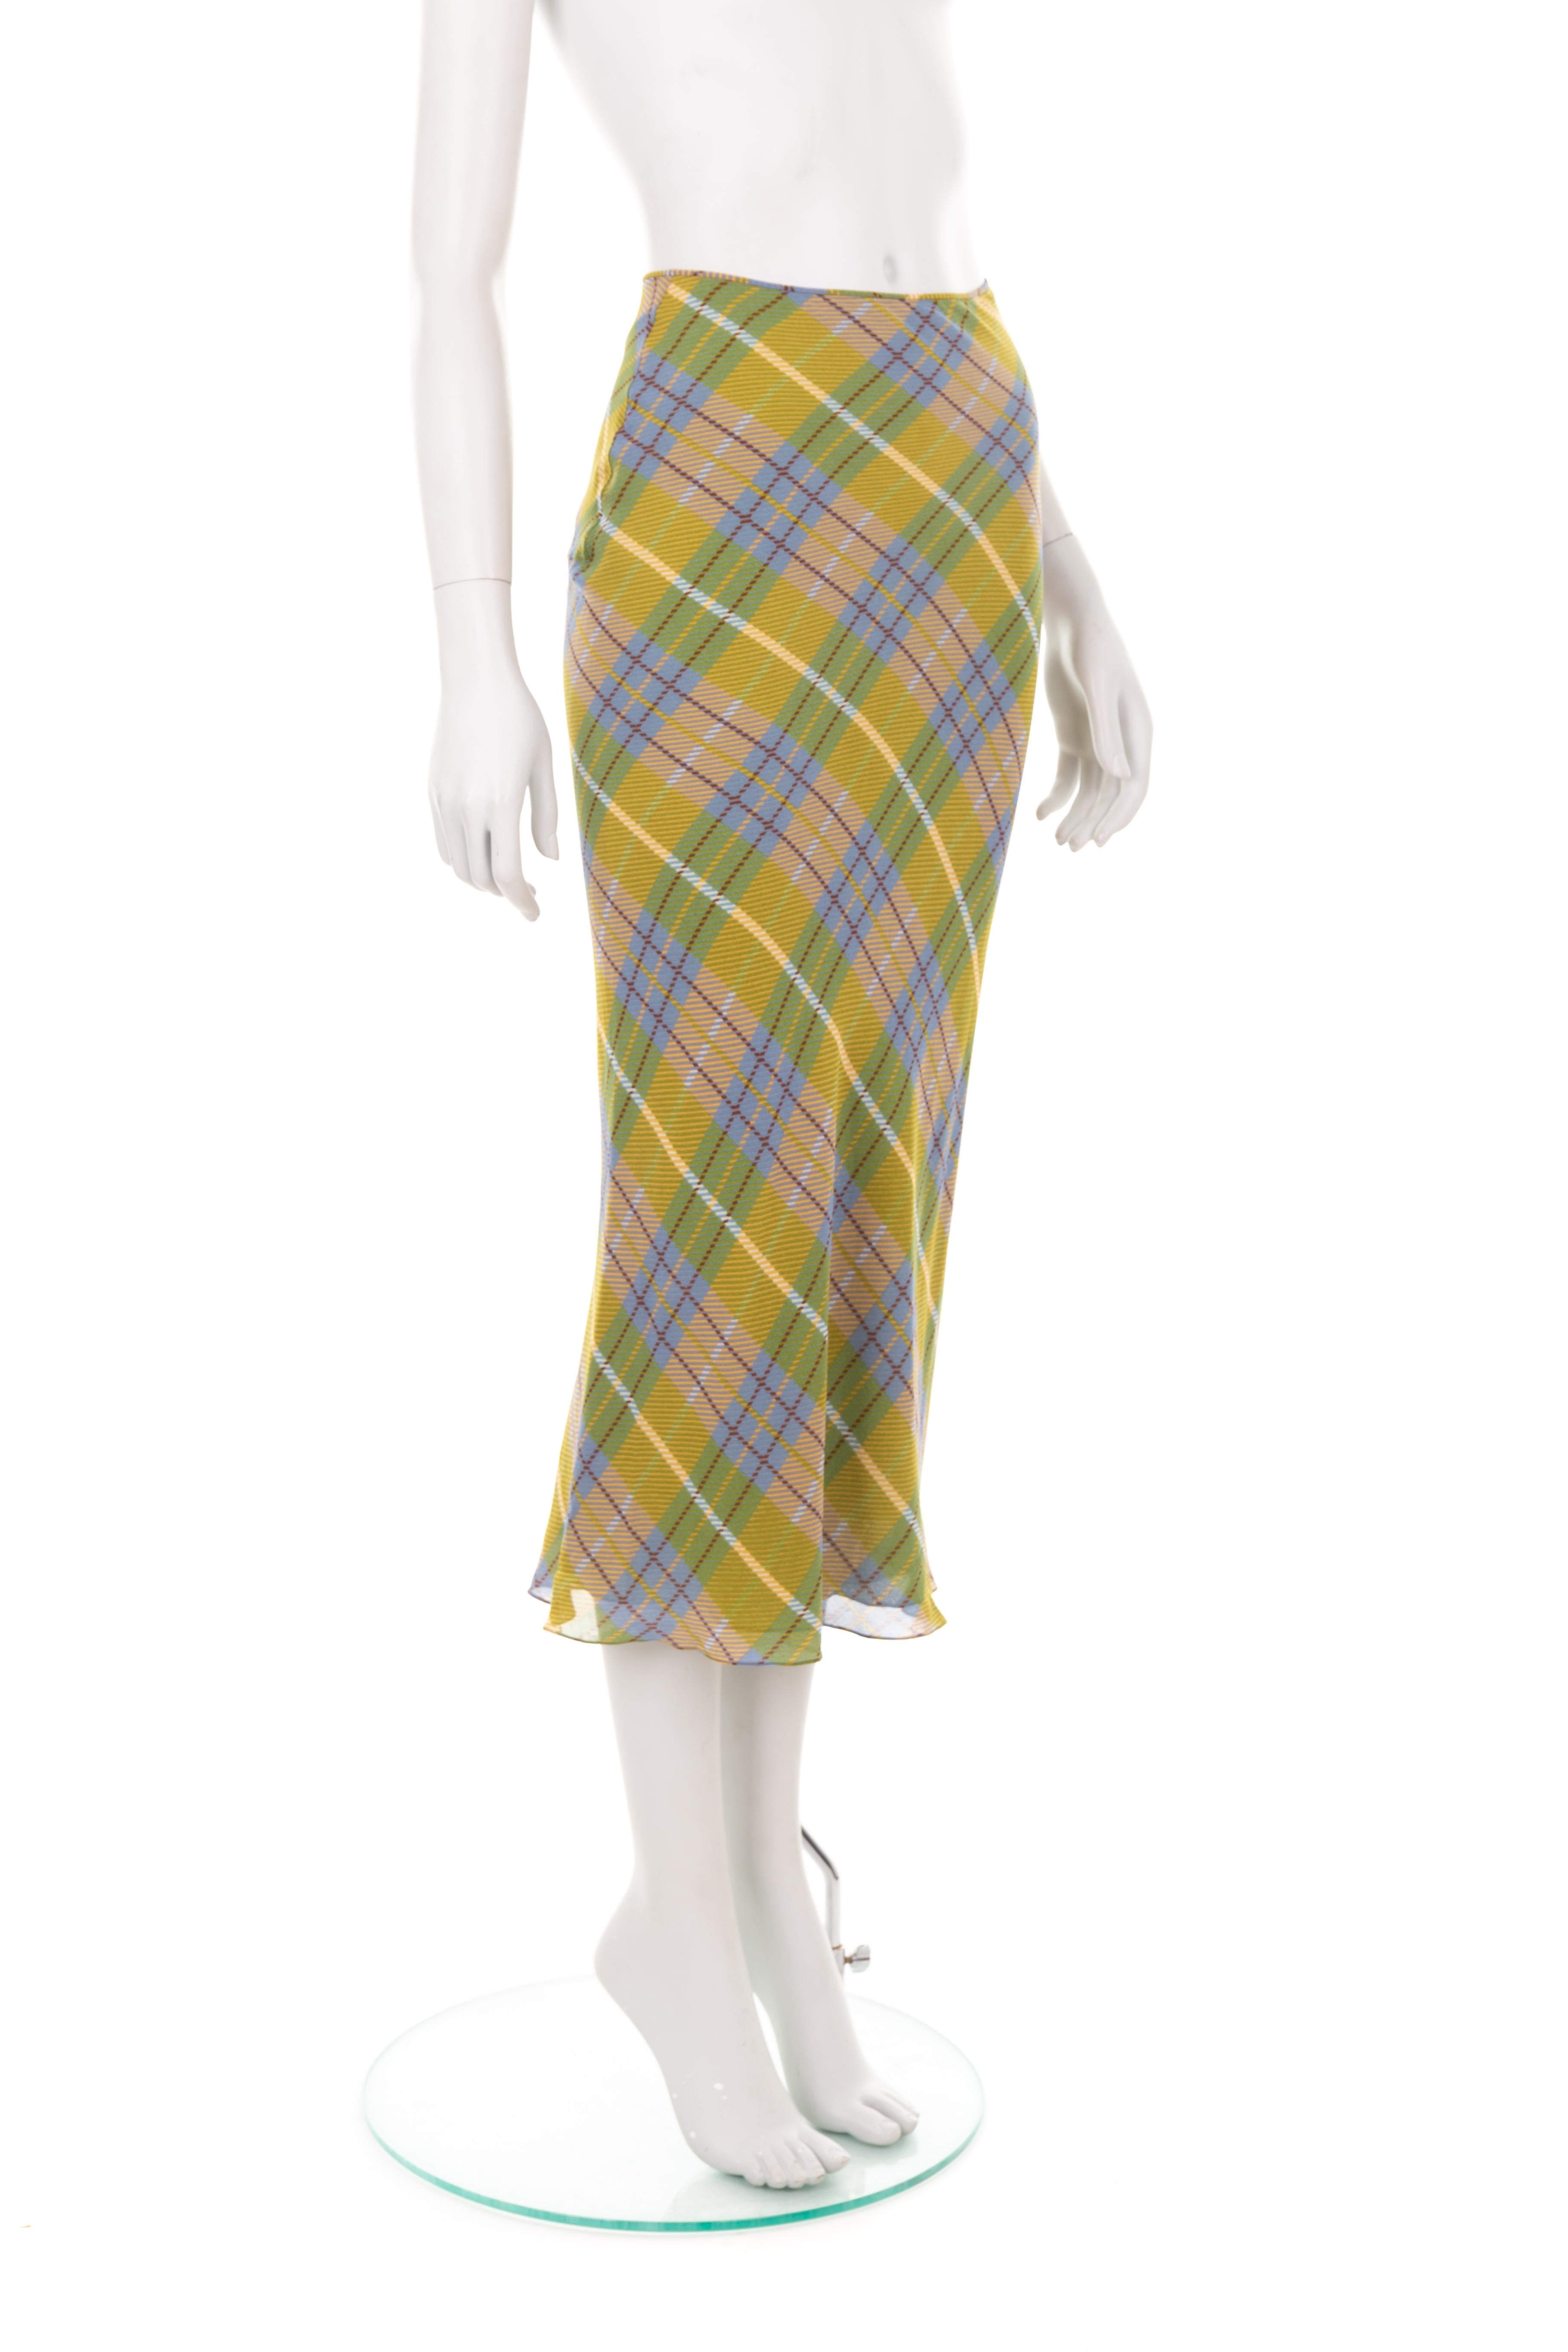 - John Galliano Fall Winter 2000 collection
- Sold by Gold Palms Vintage
- Silk midi skirt
- Bias cut
- Ochre, blue, white check motif
- Side button-up fastening
- Size: UK 8 - US 2

Waist (flat): 31 cm/ 12,2 inch
Hips (flat): 36 cm/ 14,1